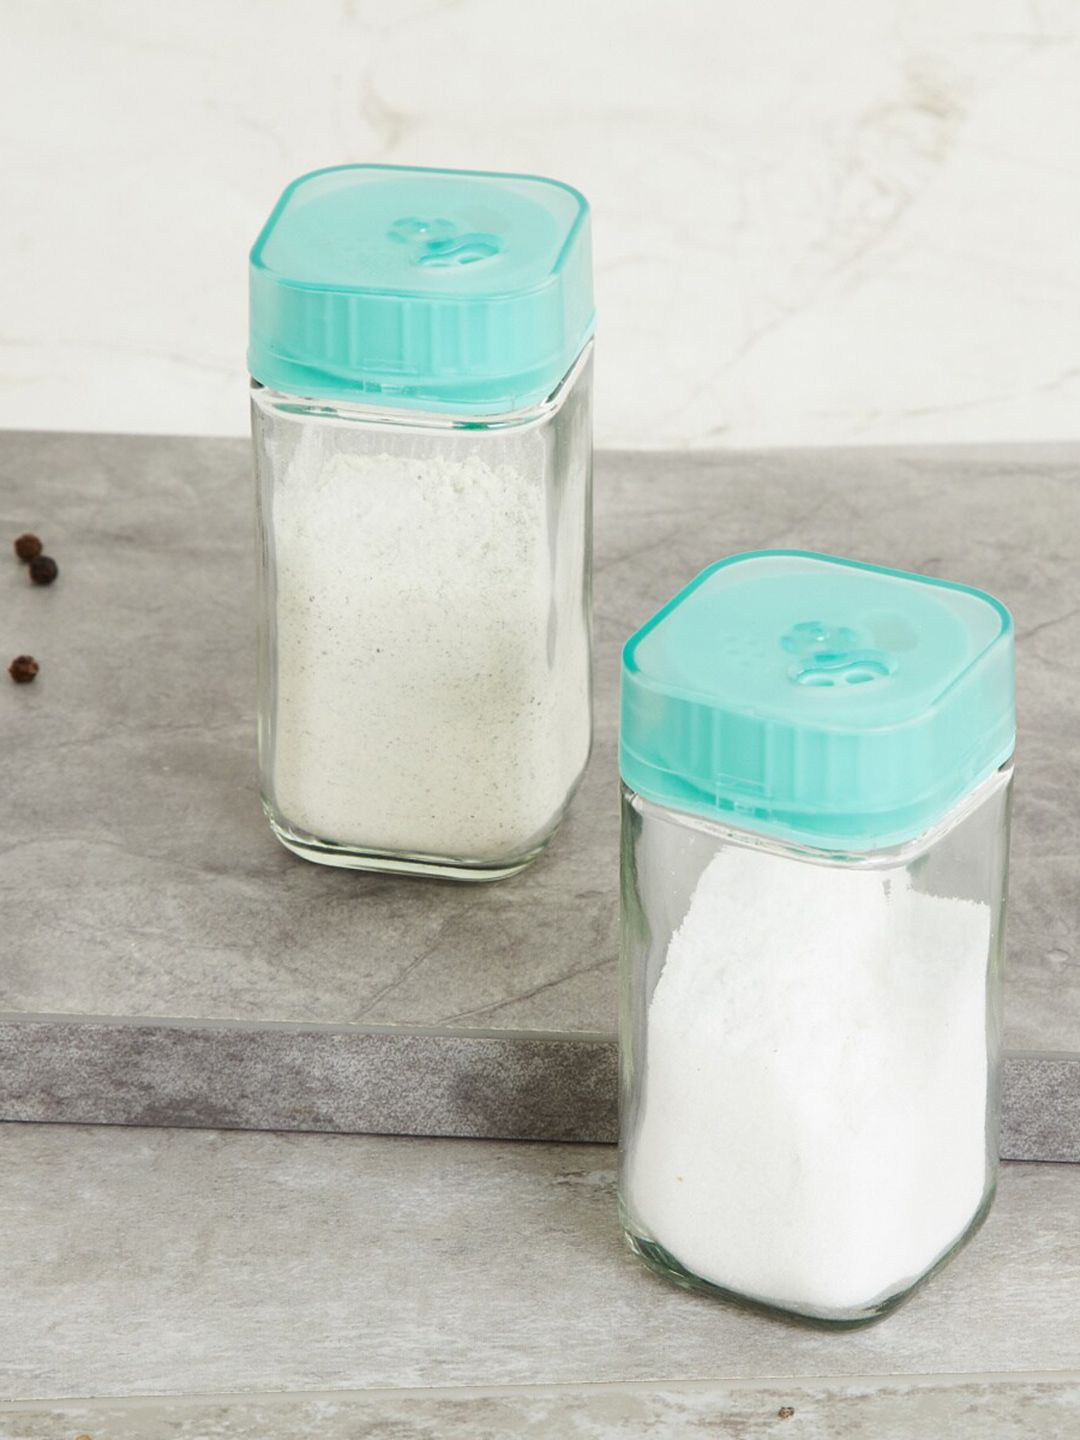 Home Centre Set of 2 Transparent Spice Storage Bottles - 100 ml Price in India